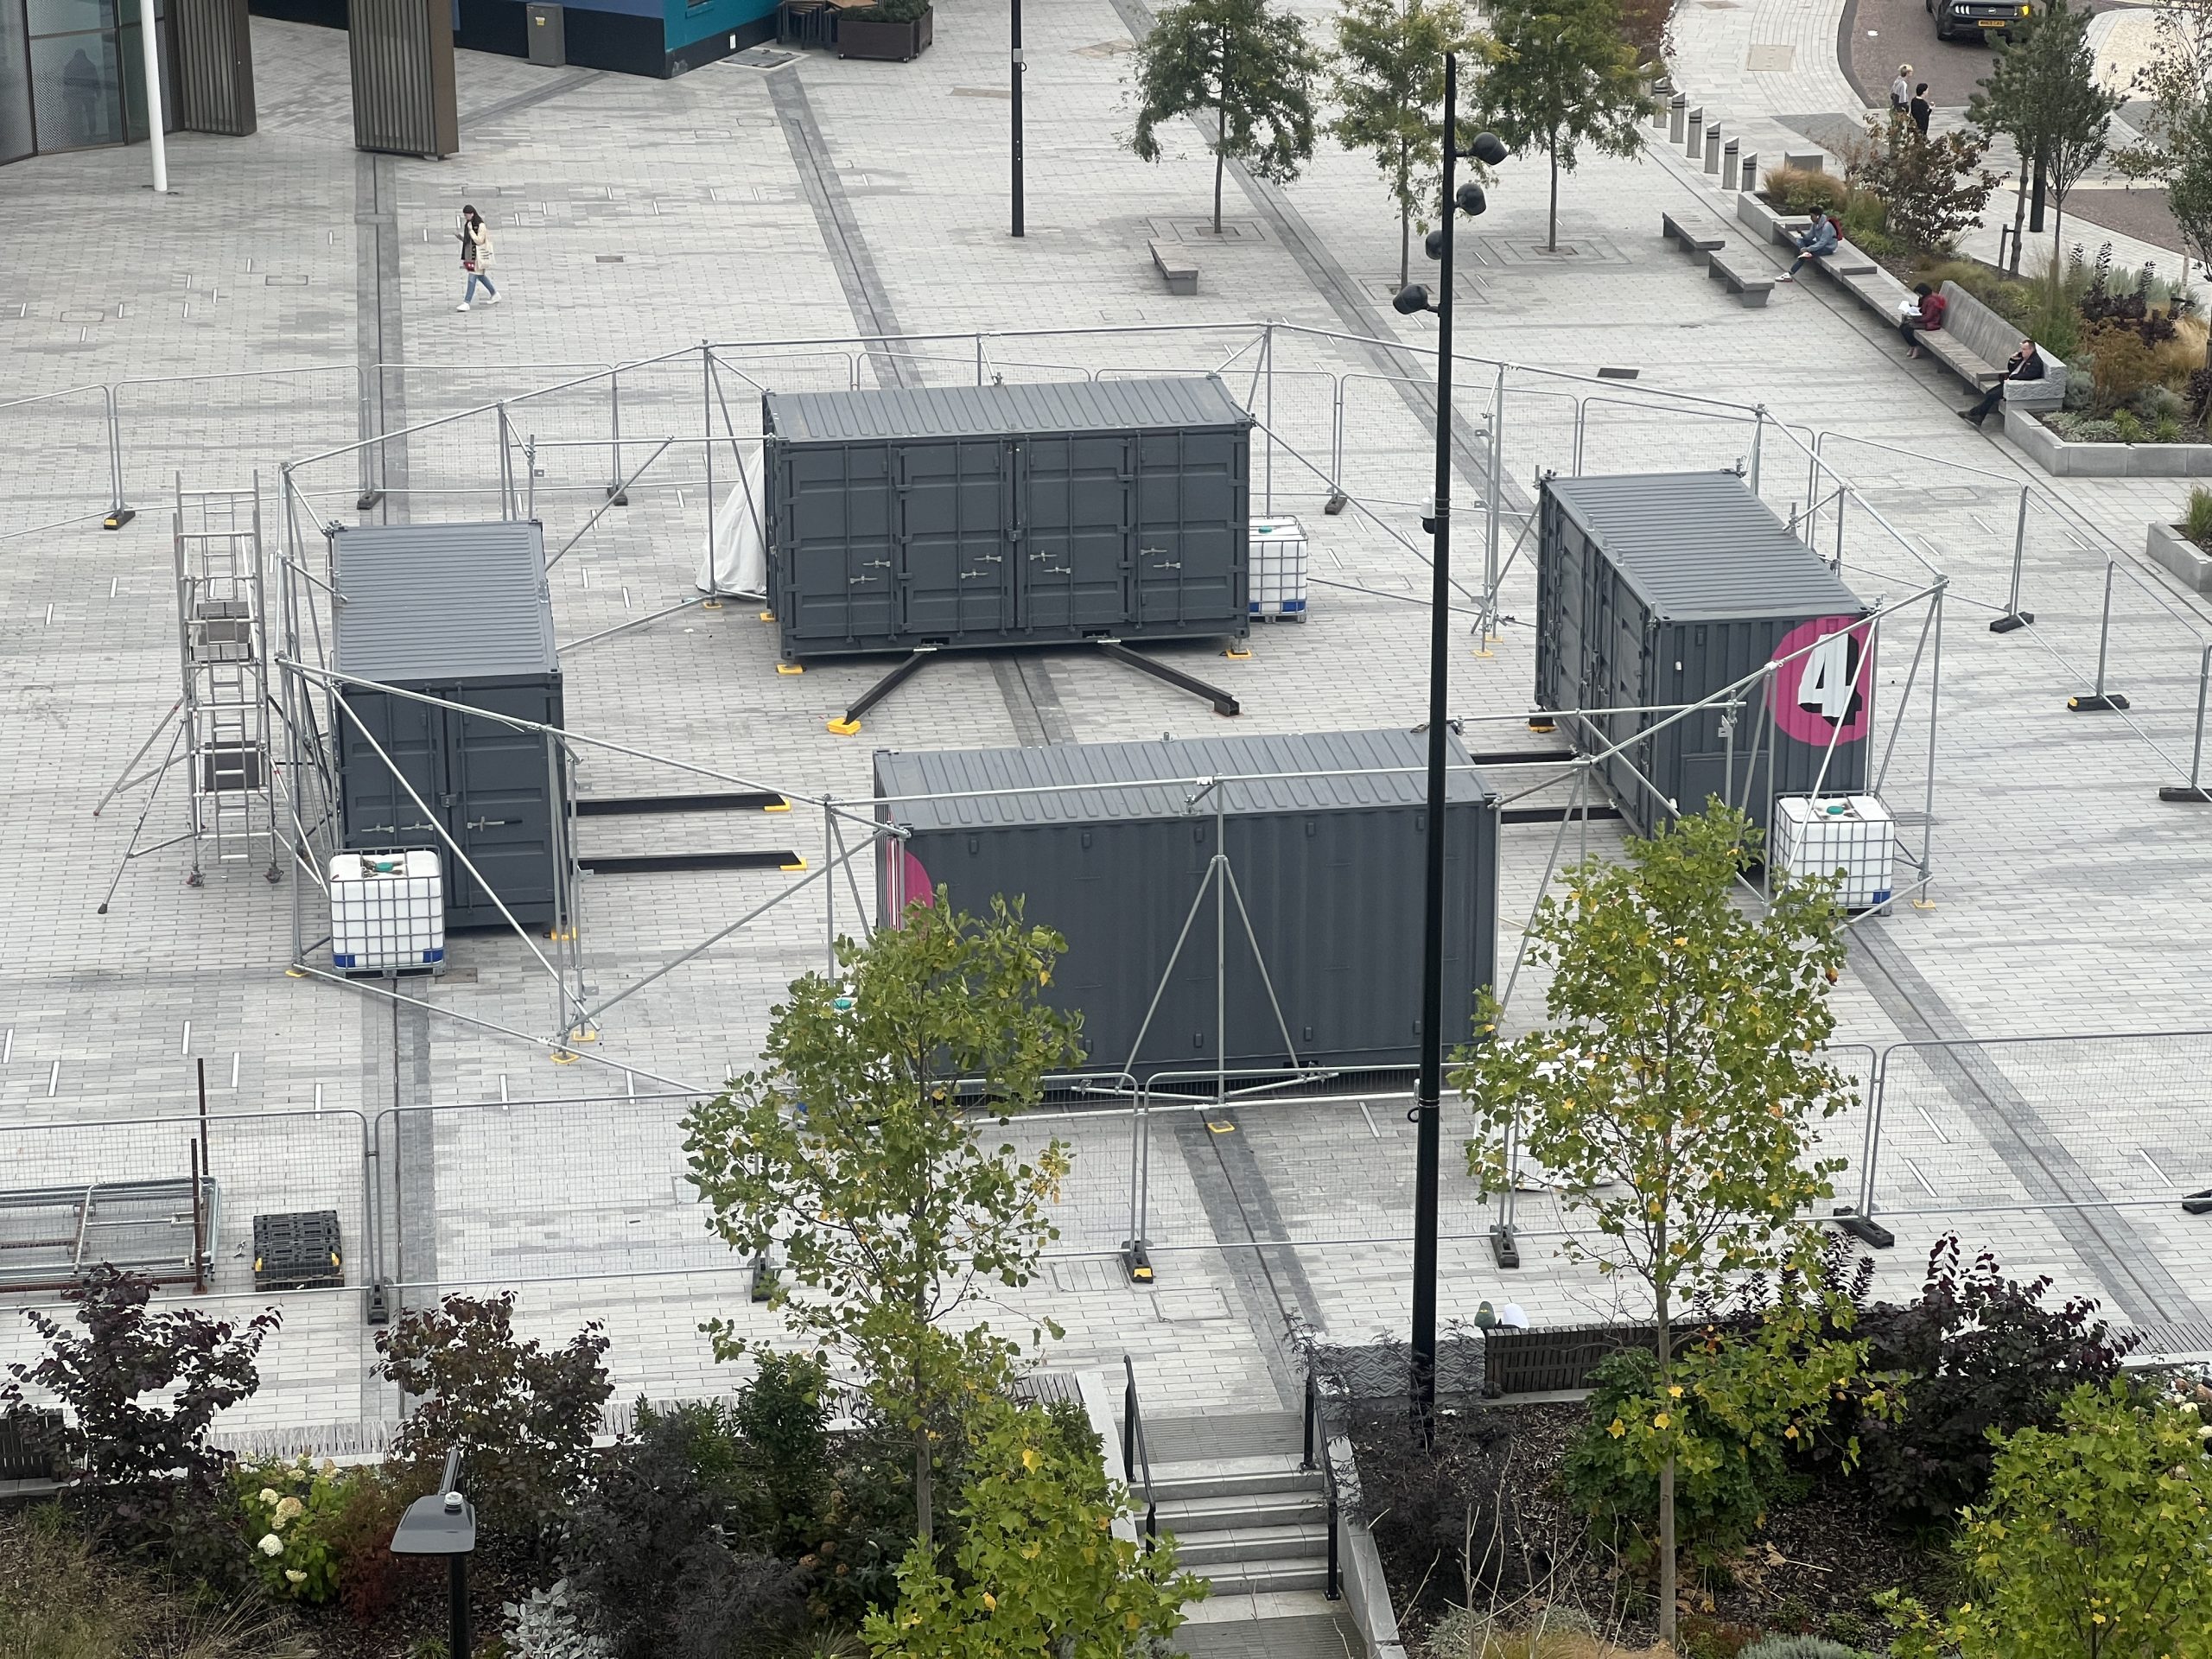 A photograph of the MET being installed at University Square. 4 20 foot high cube shipping containers are arranged in a circle surrounded by a scaffolding frame.